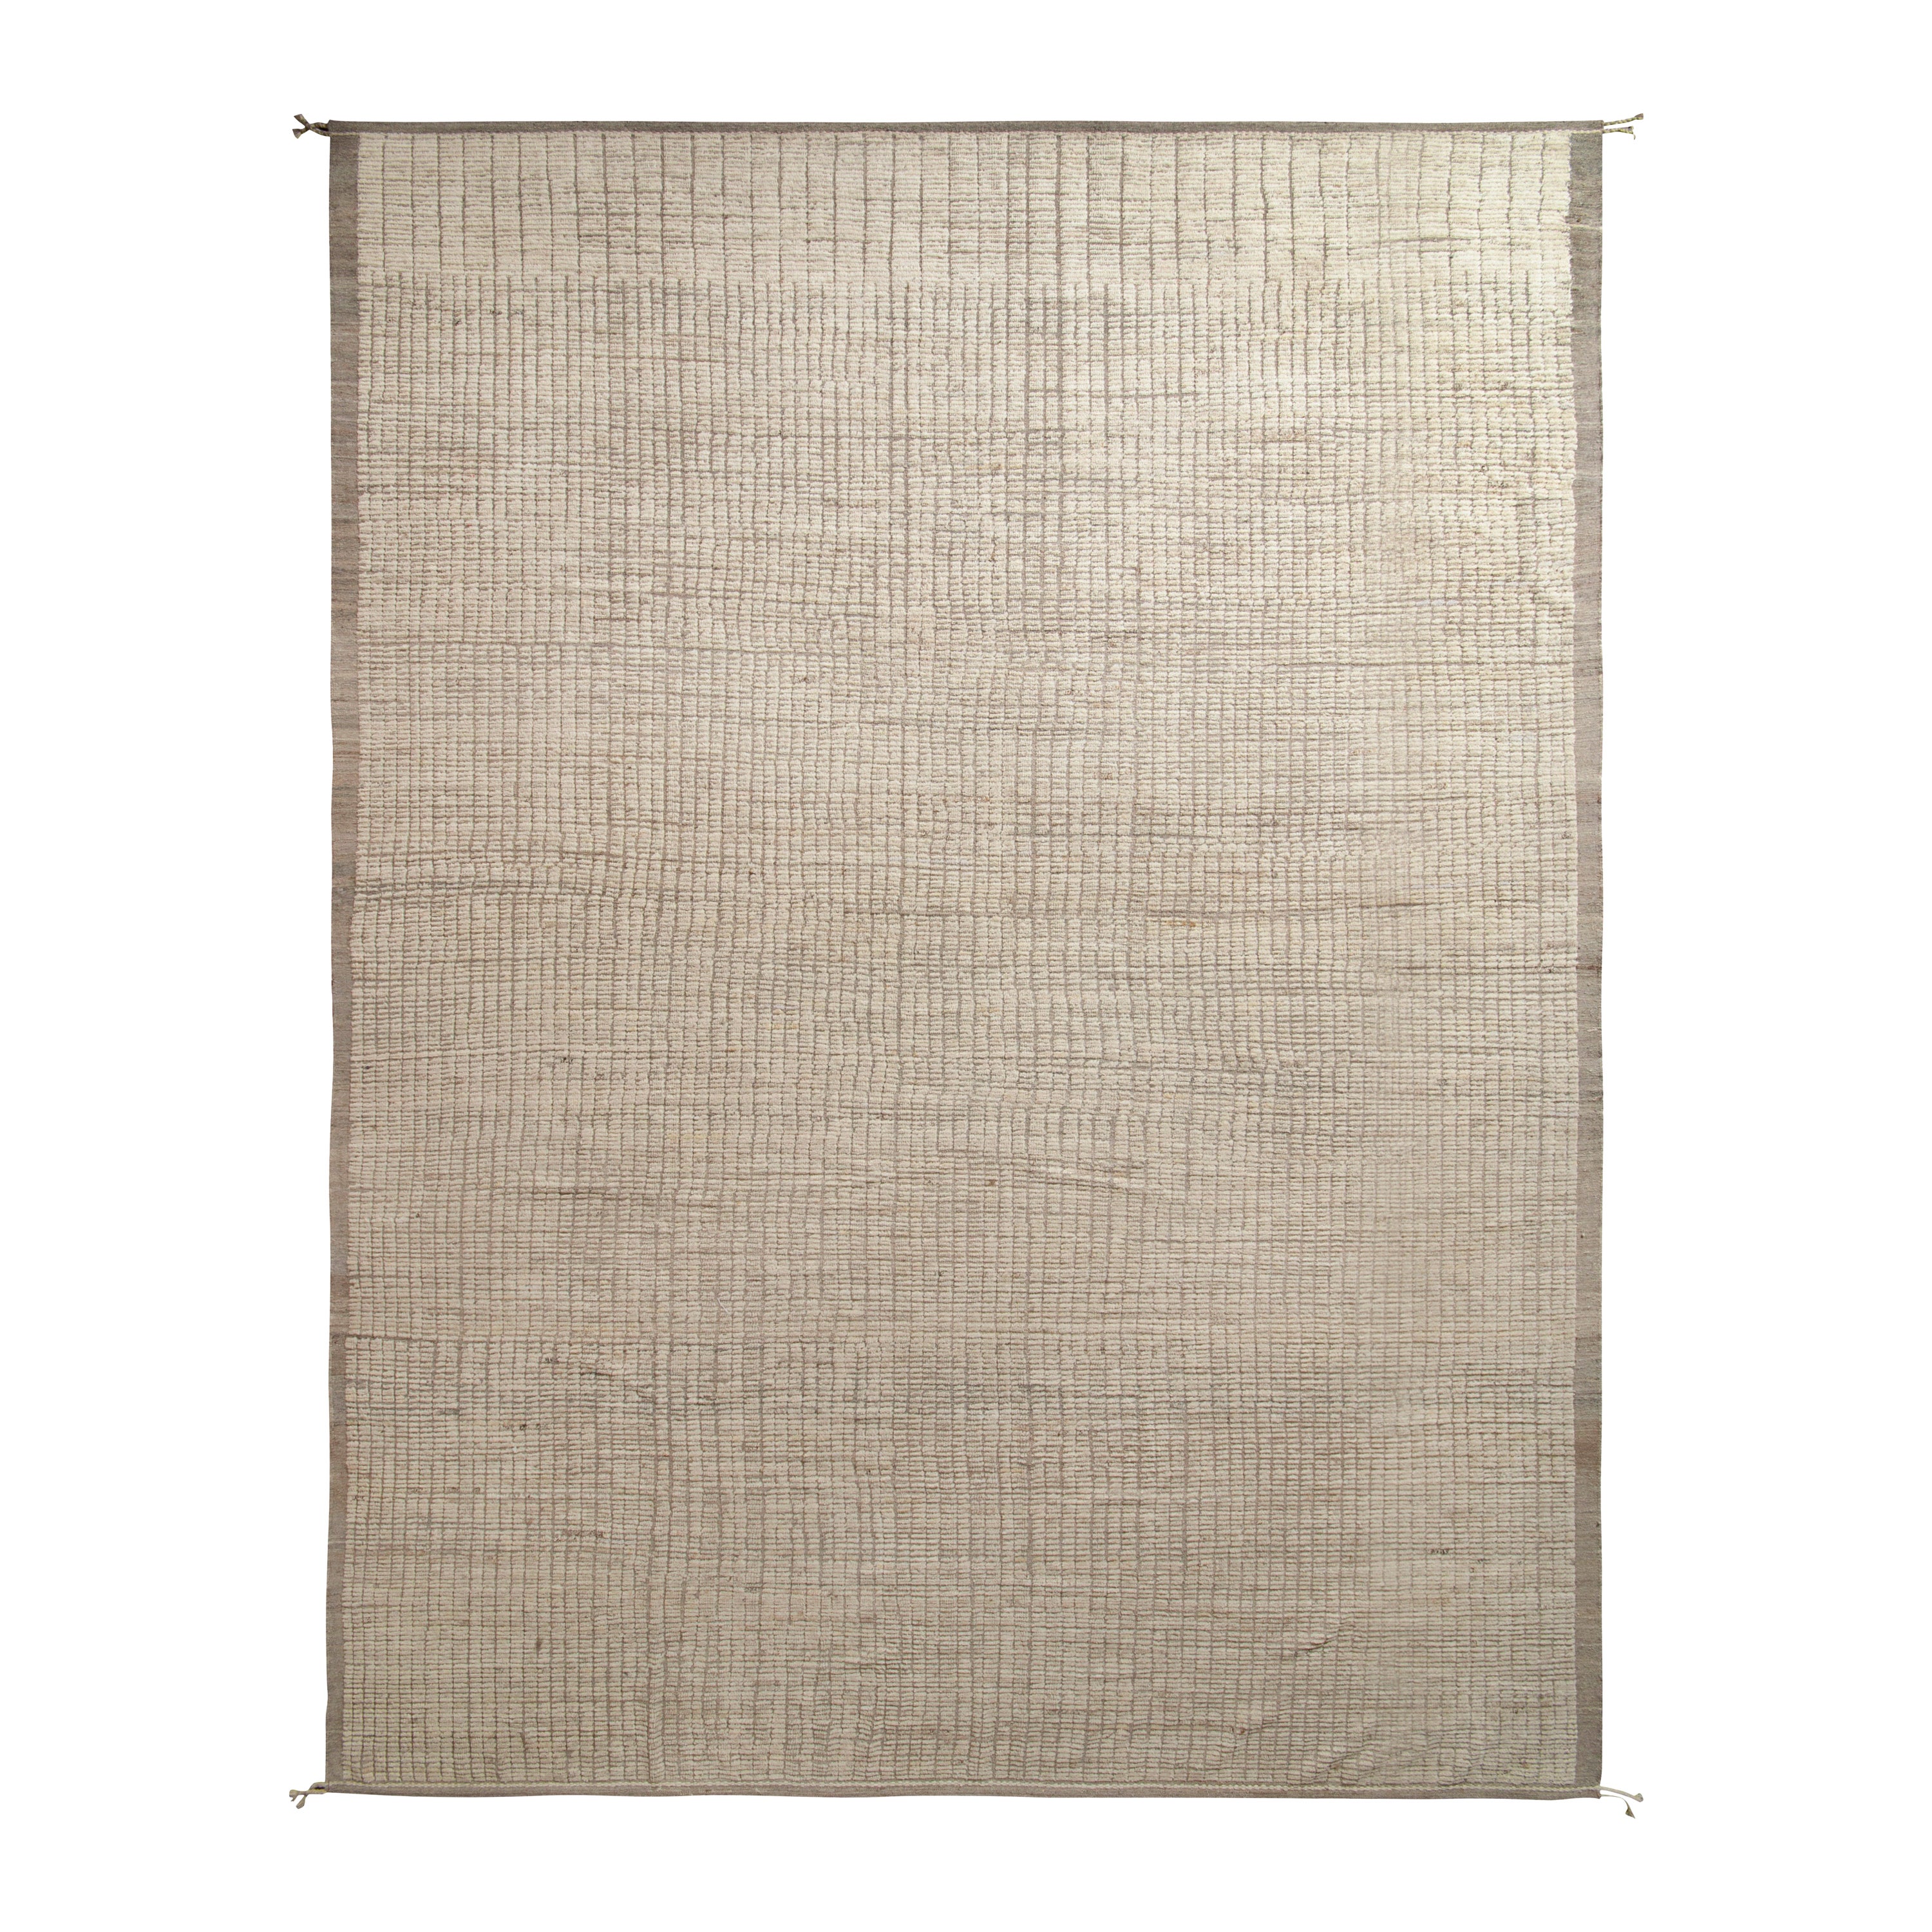 Rug & Kilim’s Moroccan Style Rug in White, Beige Brown High-Low Pattern